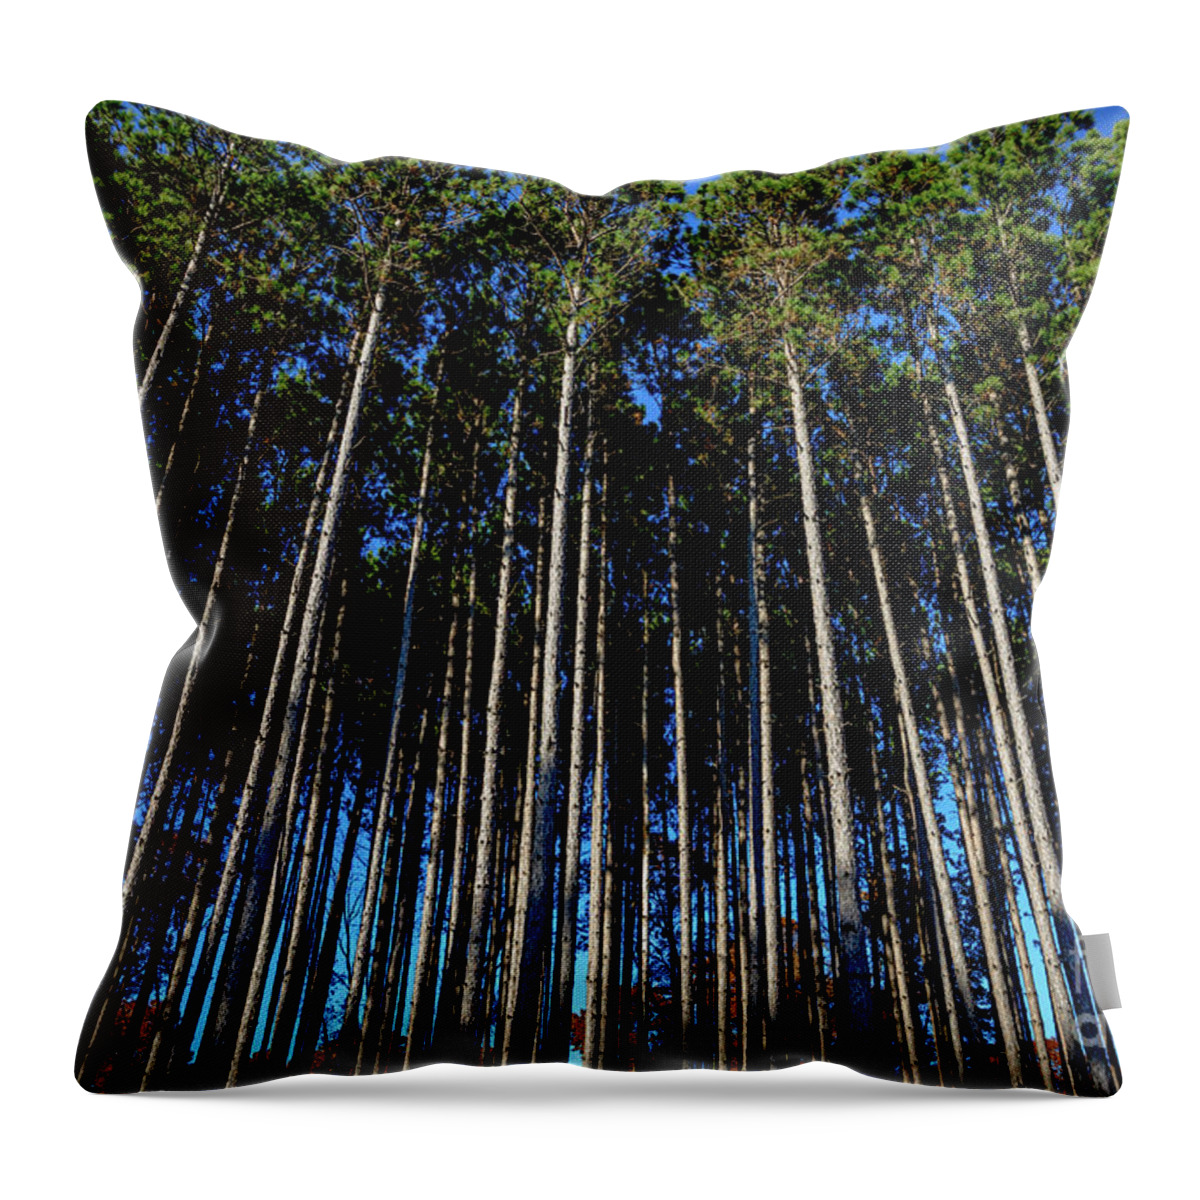 Pines Throw Pillow featuring the photograph Tall Pines by Debra Kewley